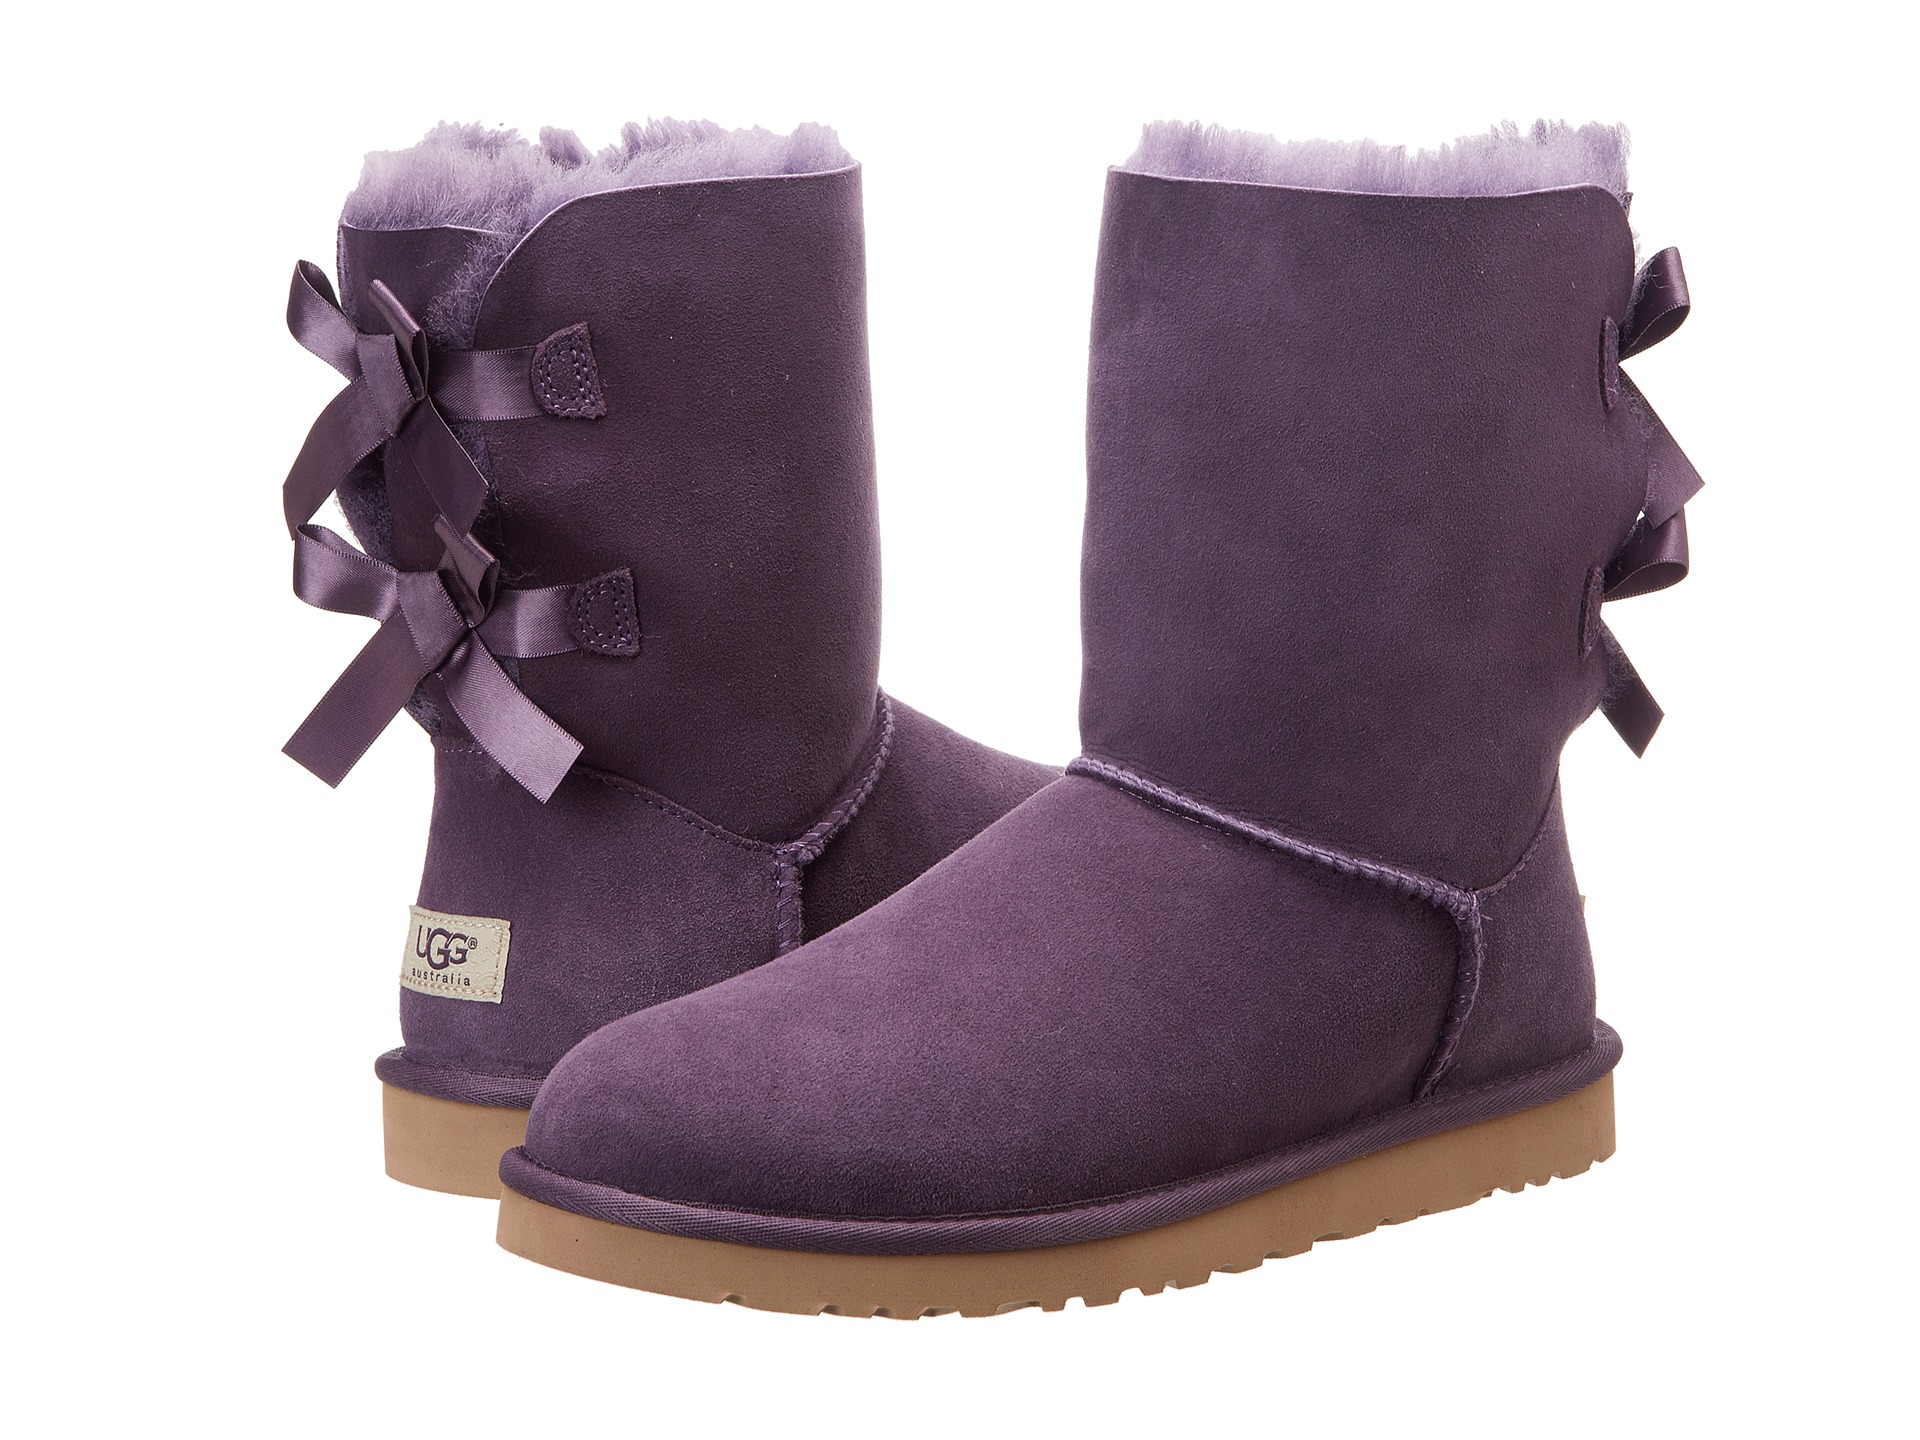 Ugg Bailey Bow Purple Velvet | Shipped Free at Zappos